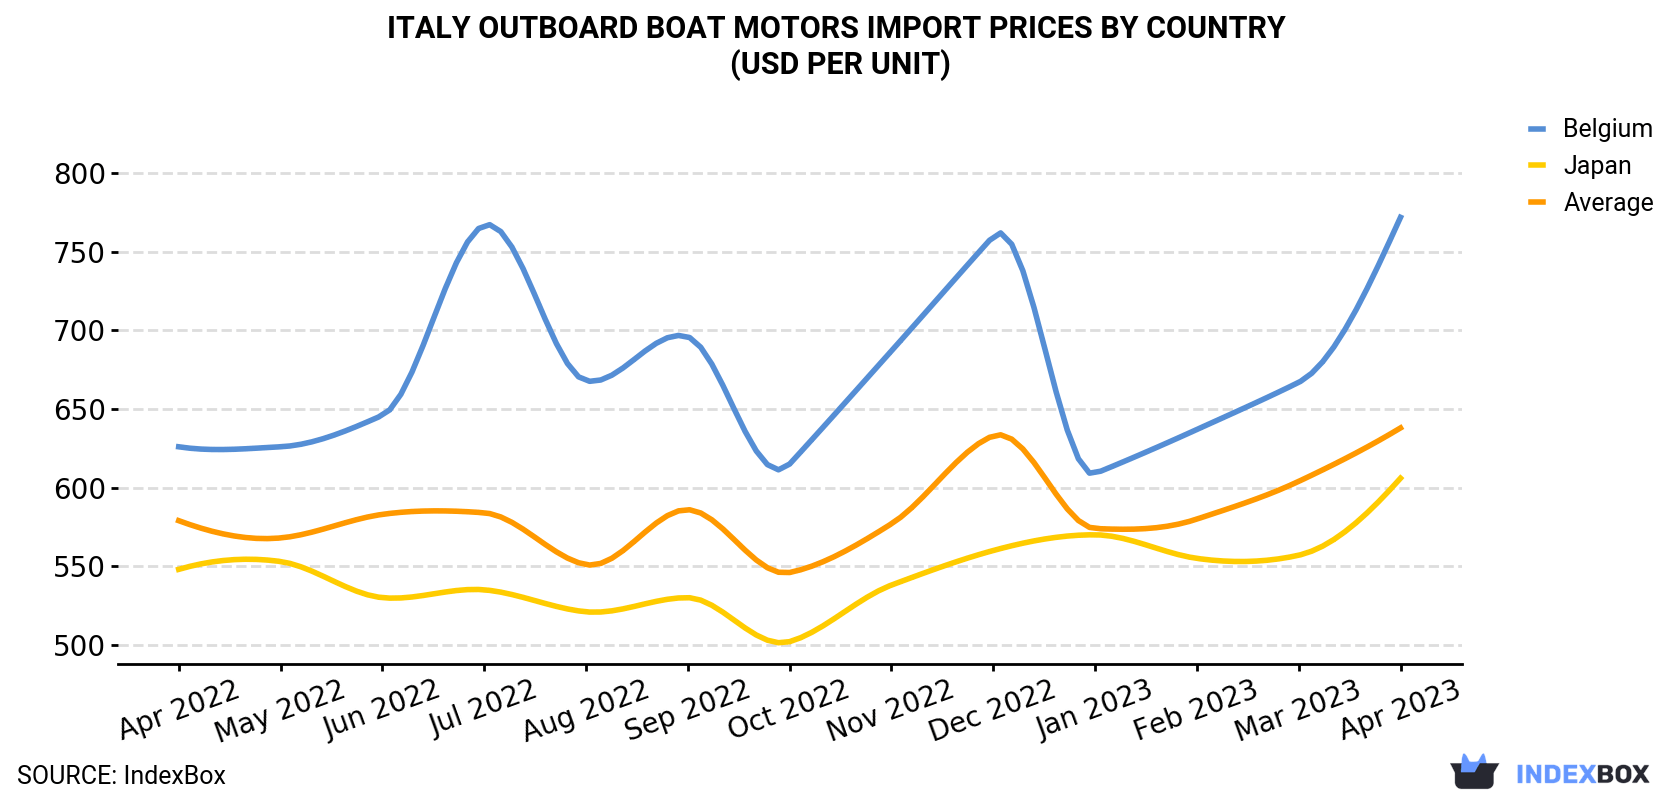 Italy Outboard Boat Motors Import Prices By Country (USD Per Unit)